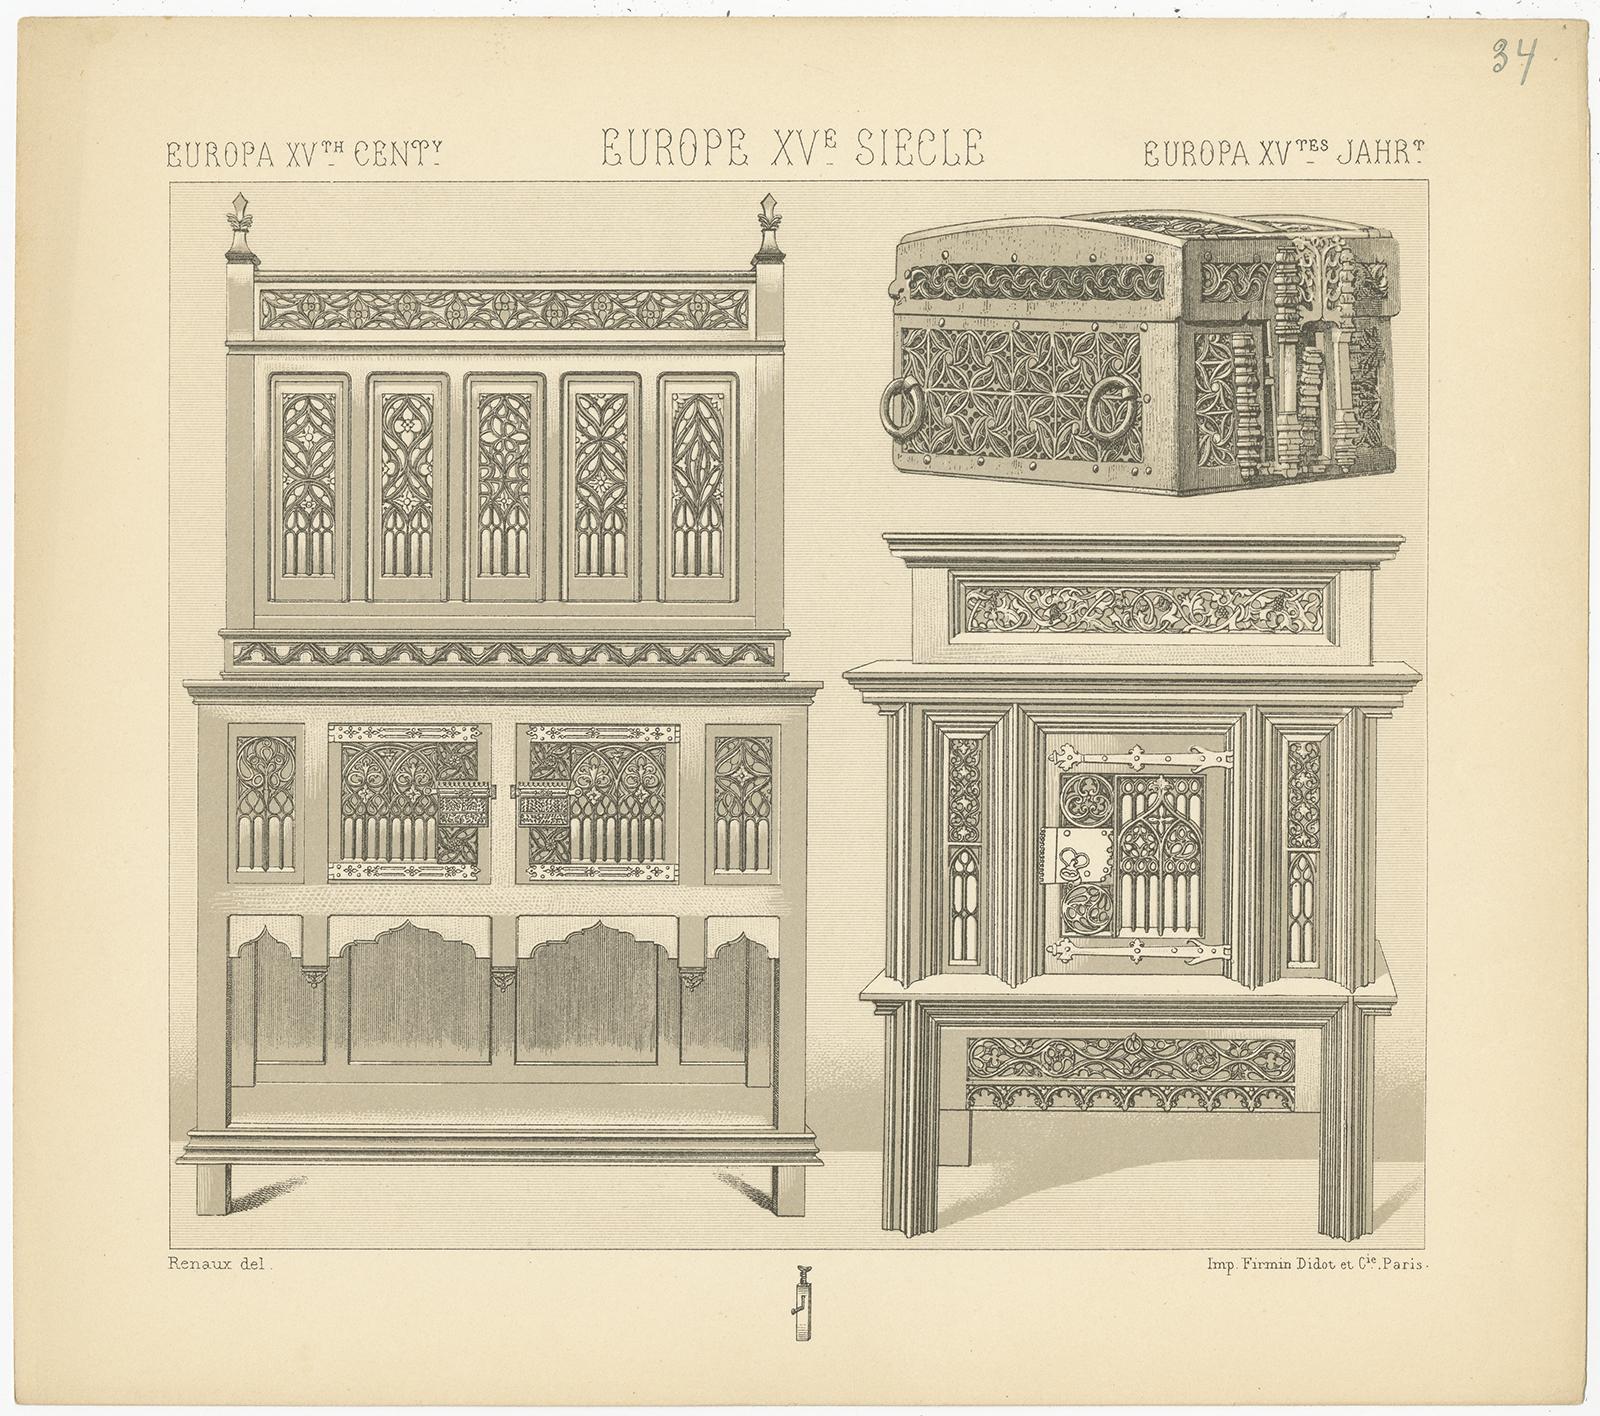 Antique print titled 'Europa XVth Cent - Europe XVe, Siecle - Europa XVtes Jahr'. Chromolithograph of European 15th century furniture. This print originates from 'Le Costume Historique' by M.A. Racinet. Published circa 1880.